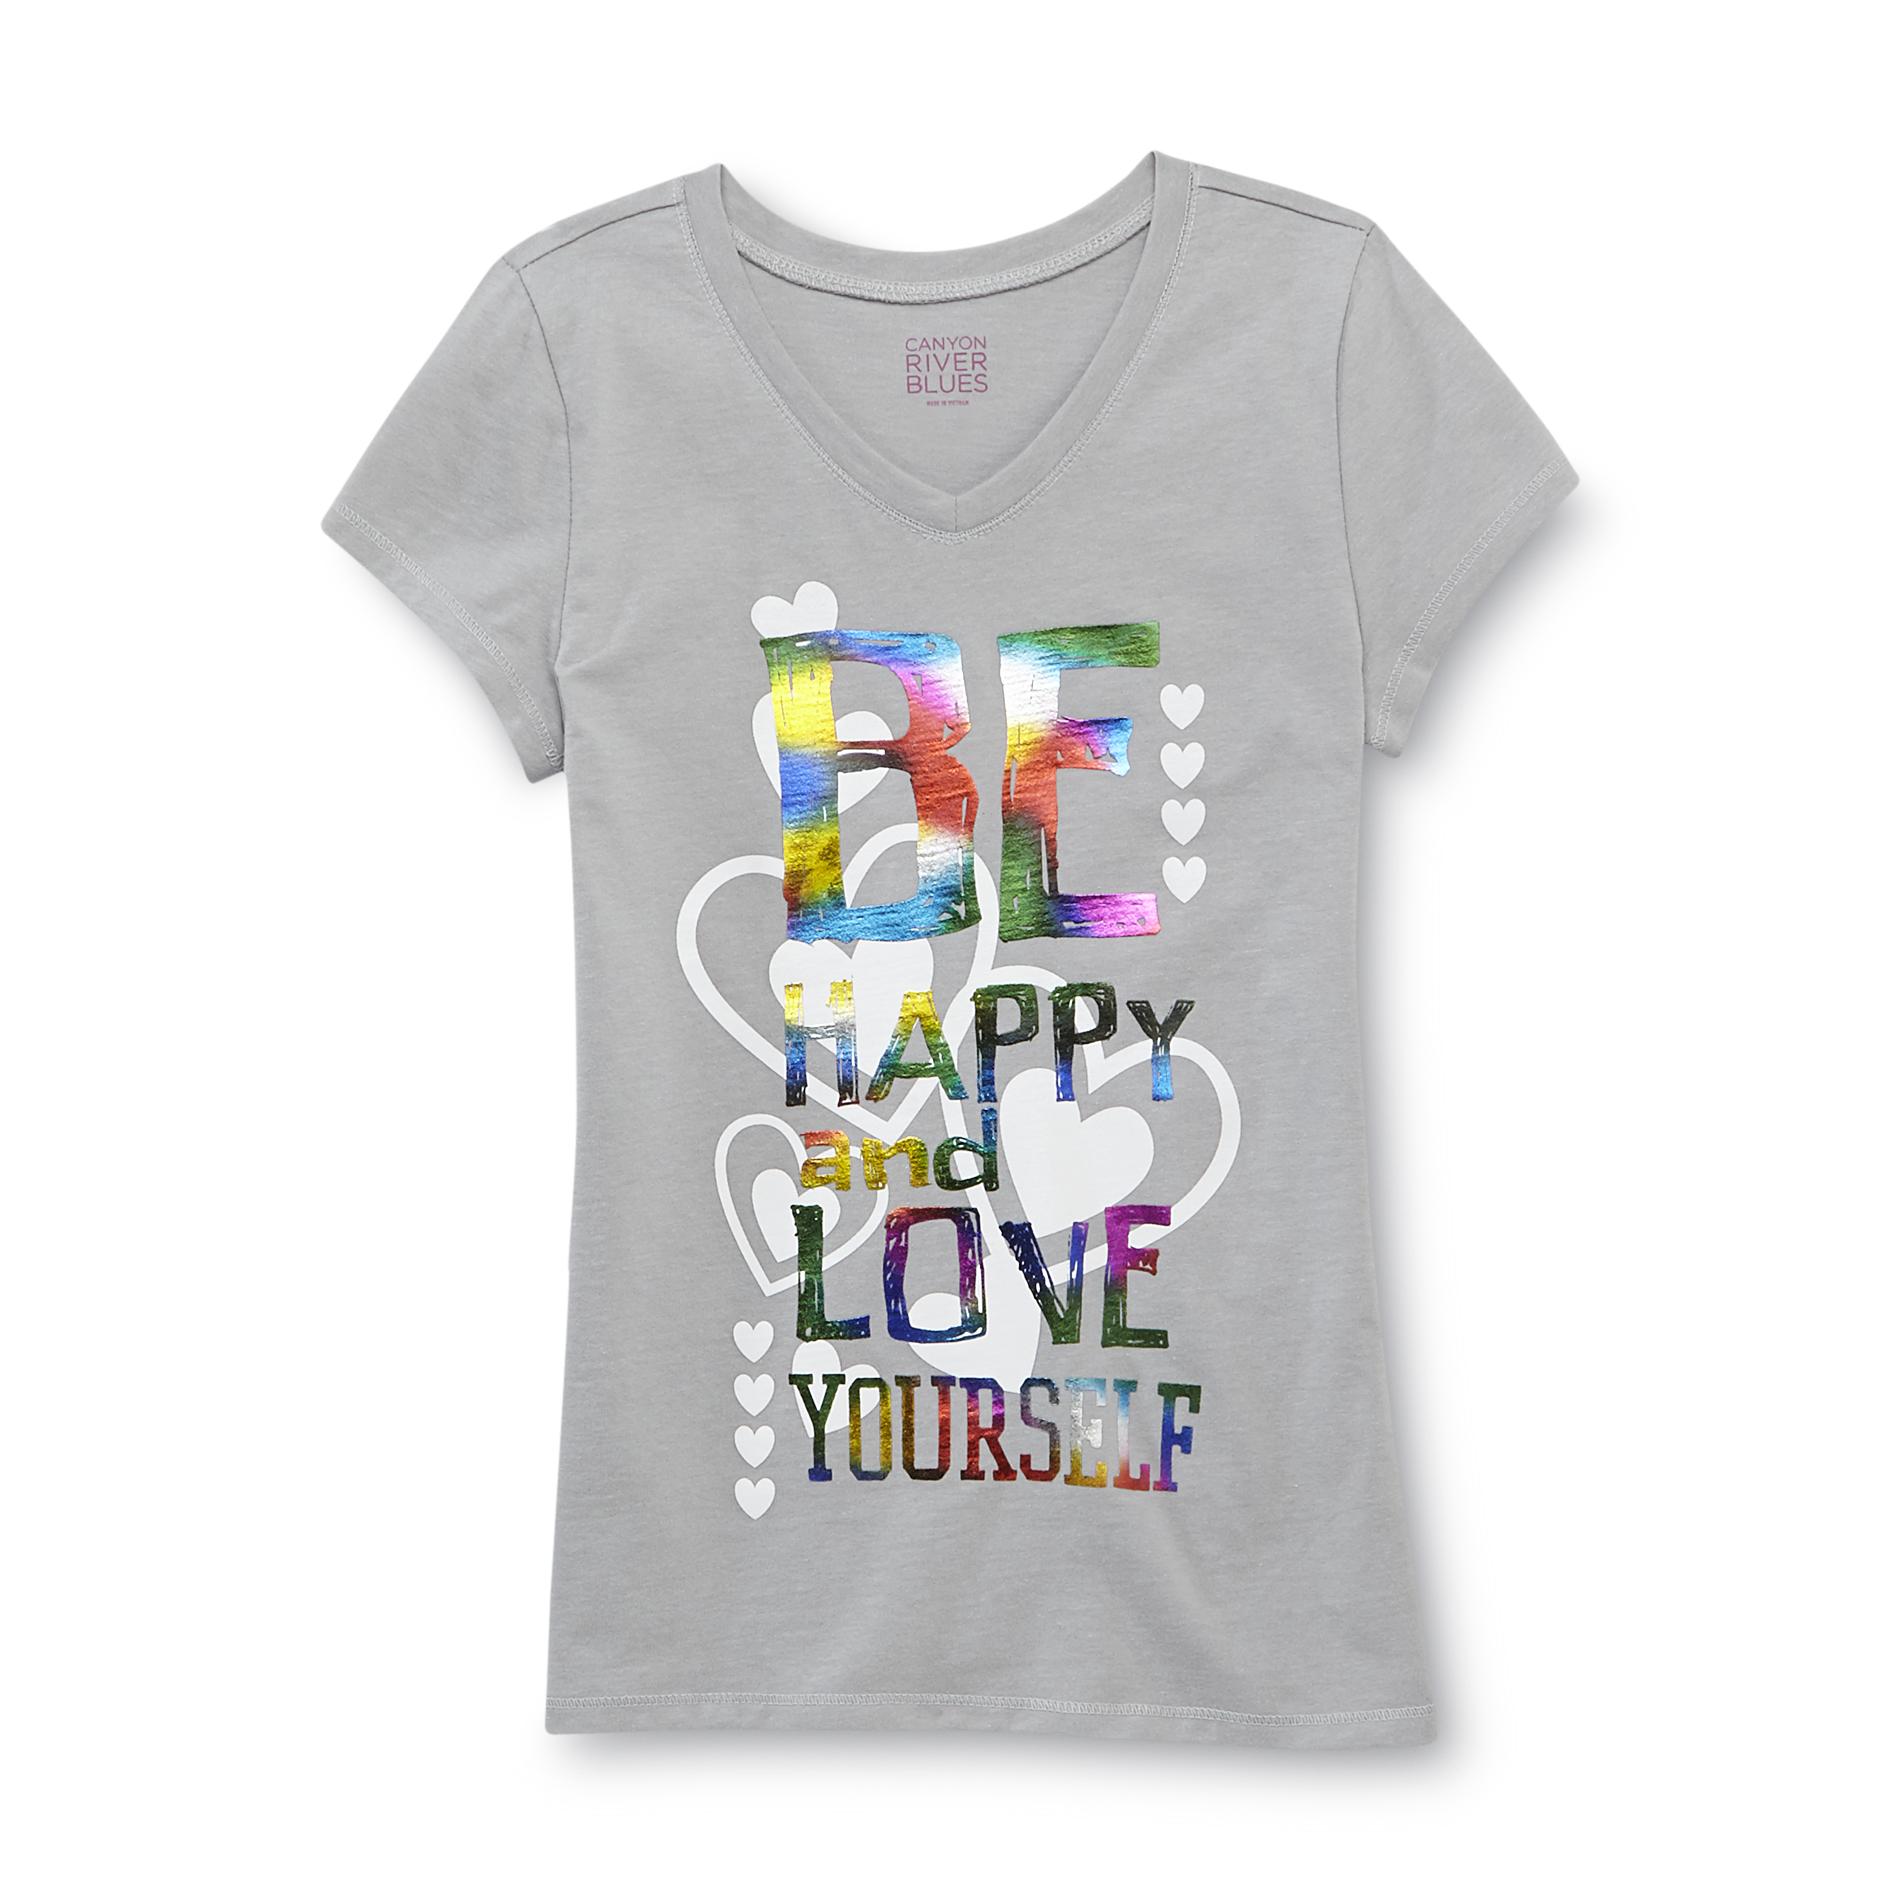 Canyon River Blues Girl's Graphic T-Shirt - Be Happy